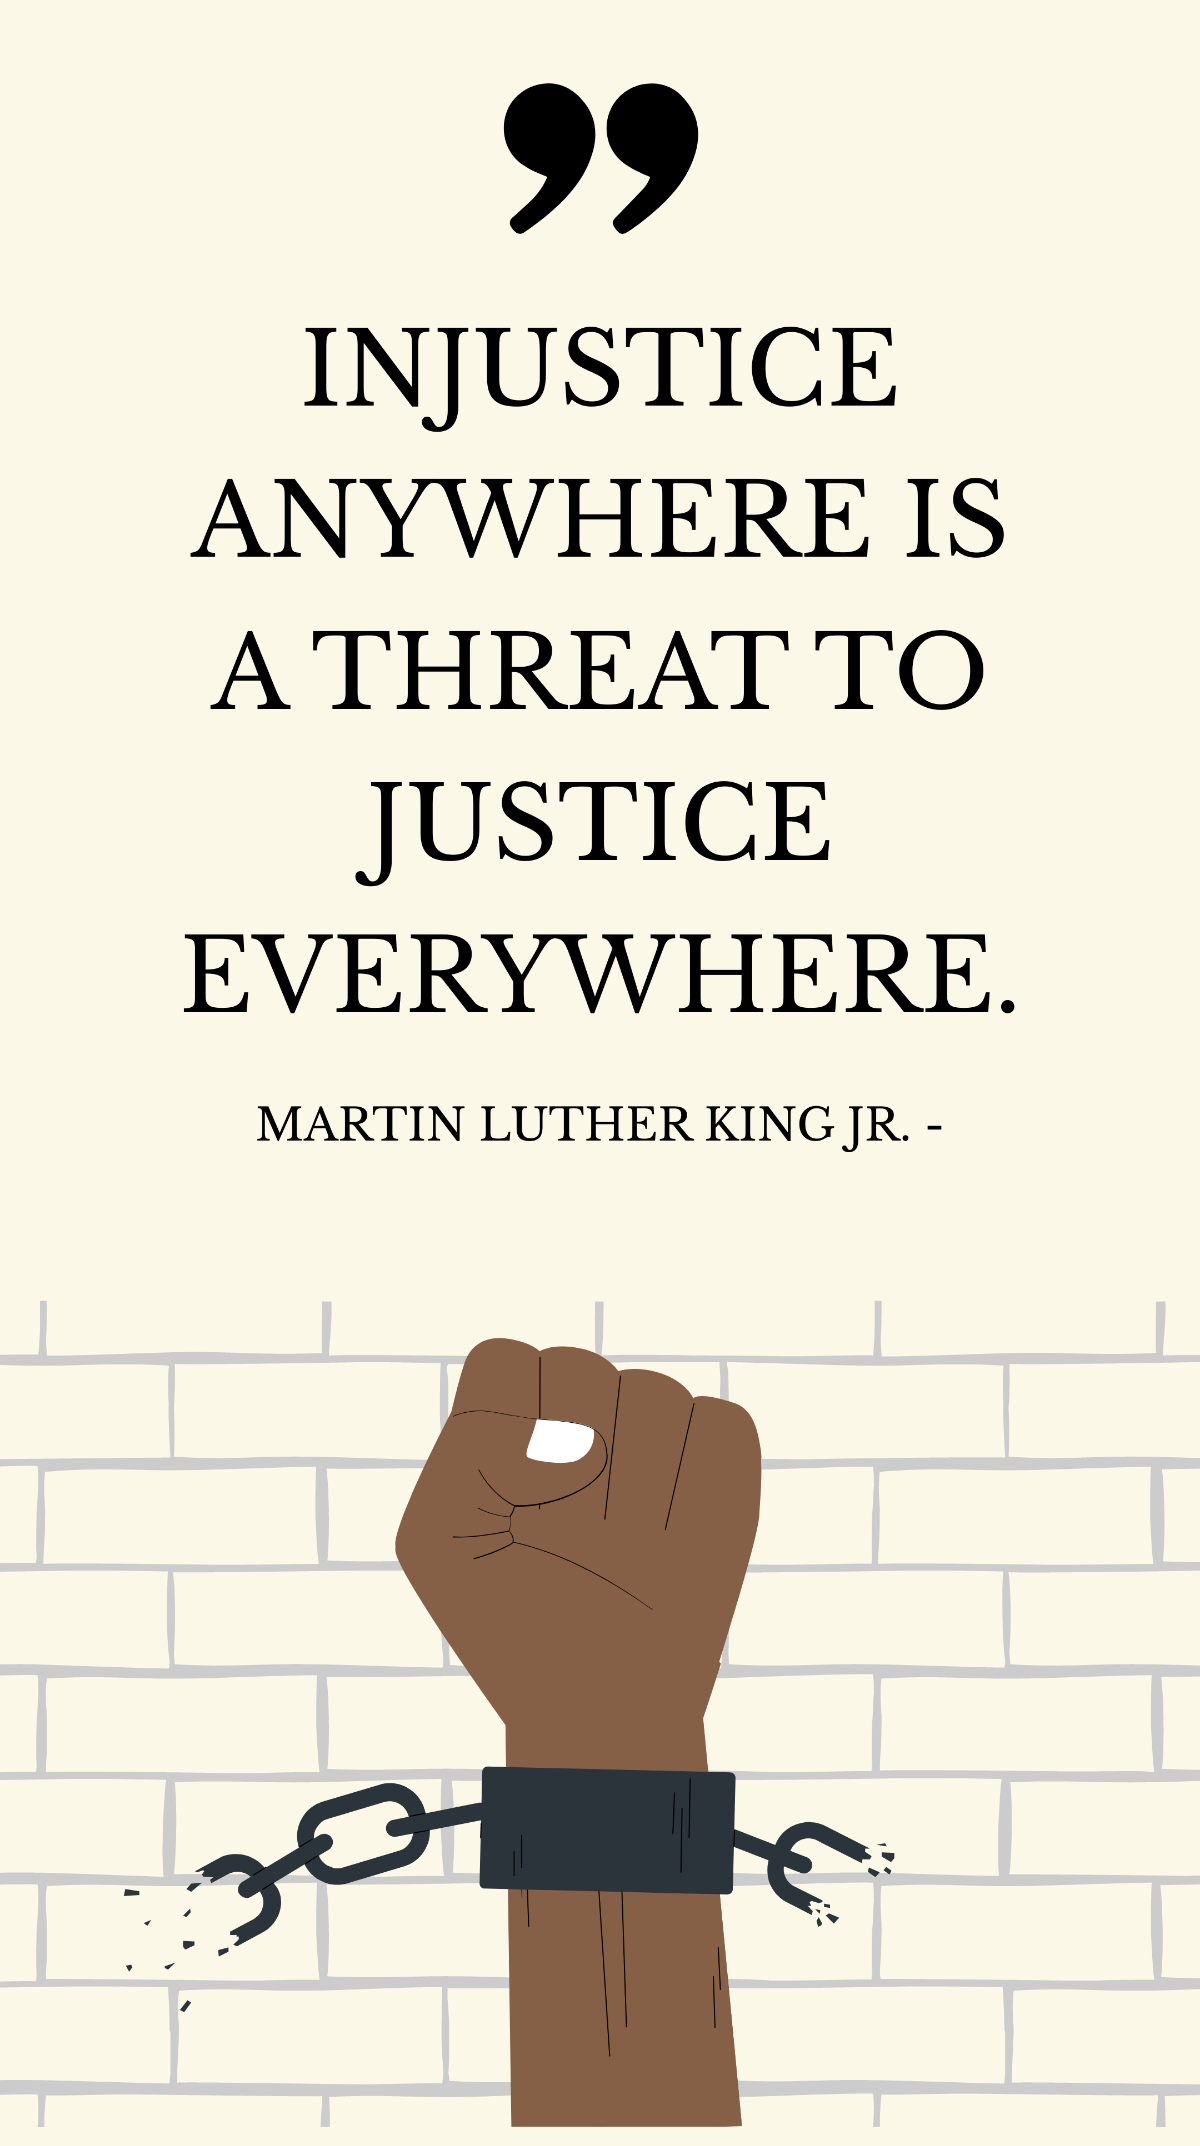 Martin Luther King Jr. - Injustice anywhere is a threat to justice everywhere. Template